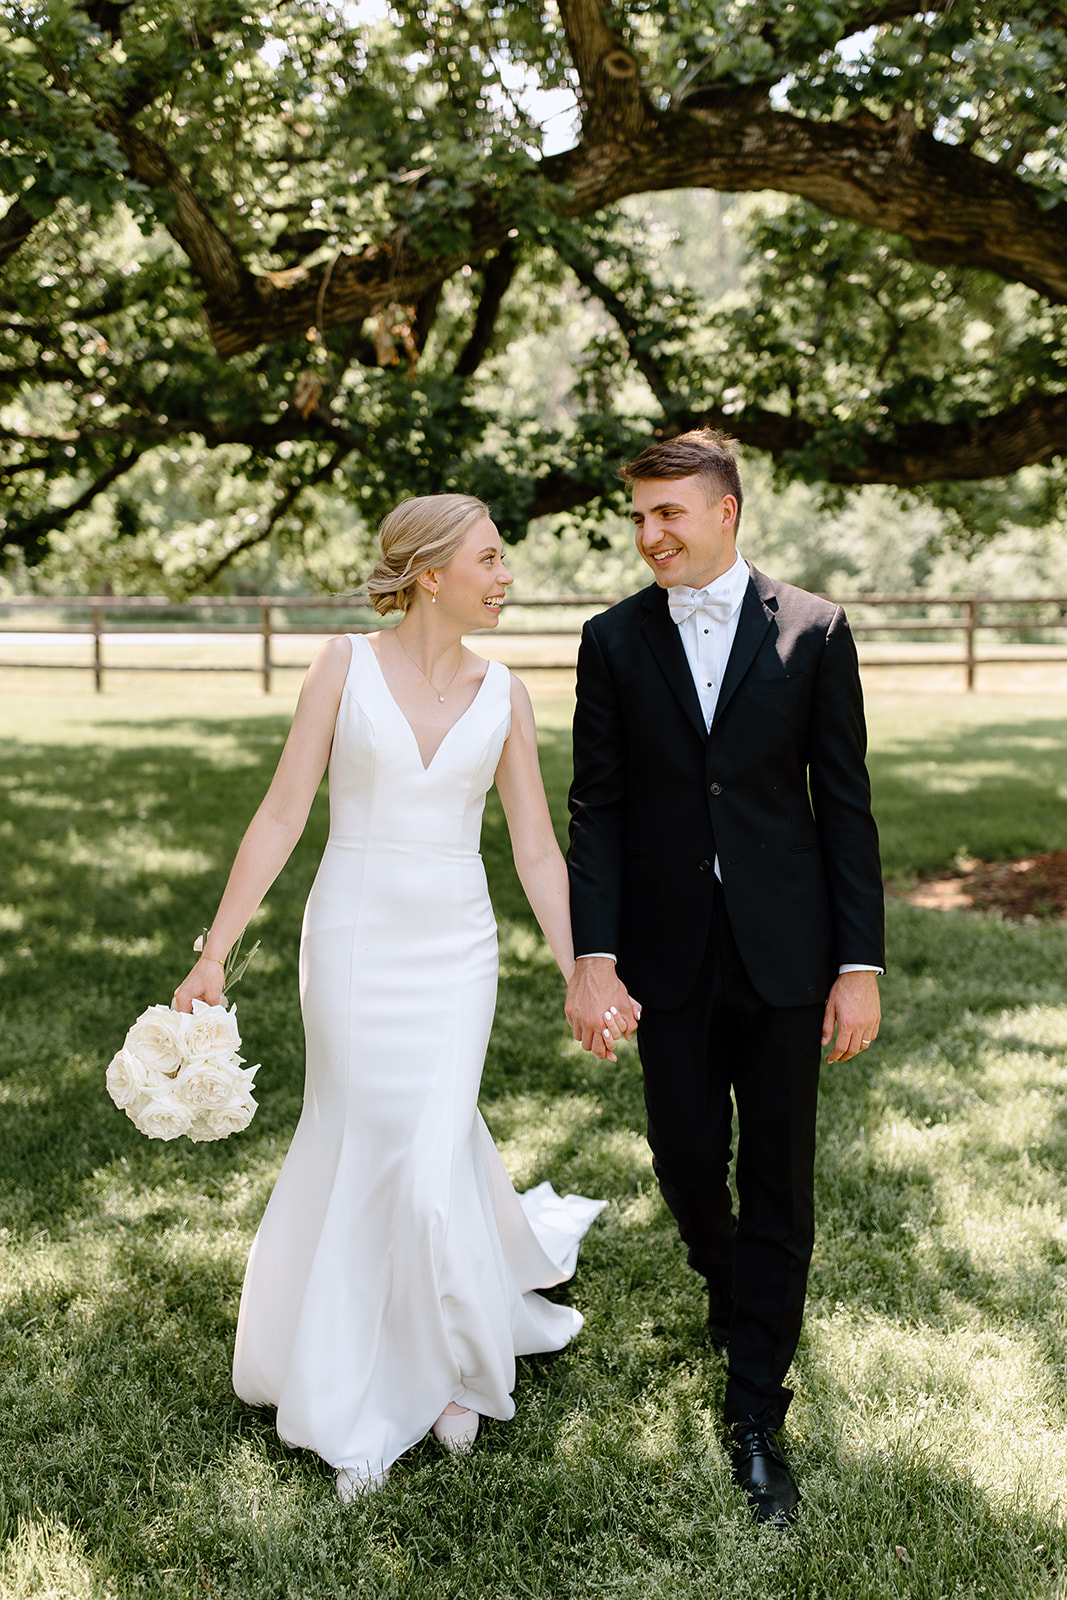 Bride and groom hold hands and walk under a tree